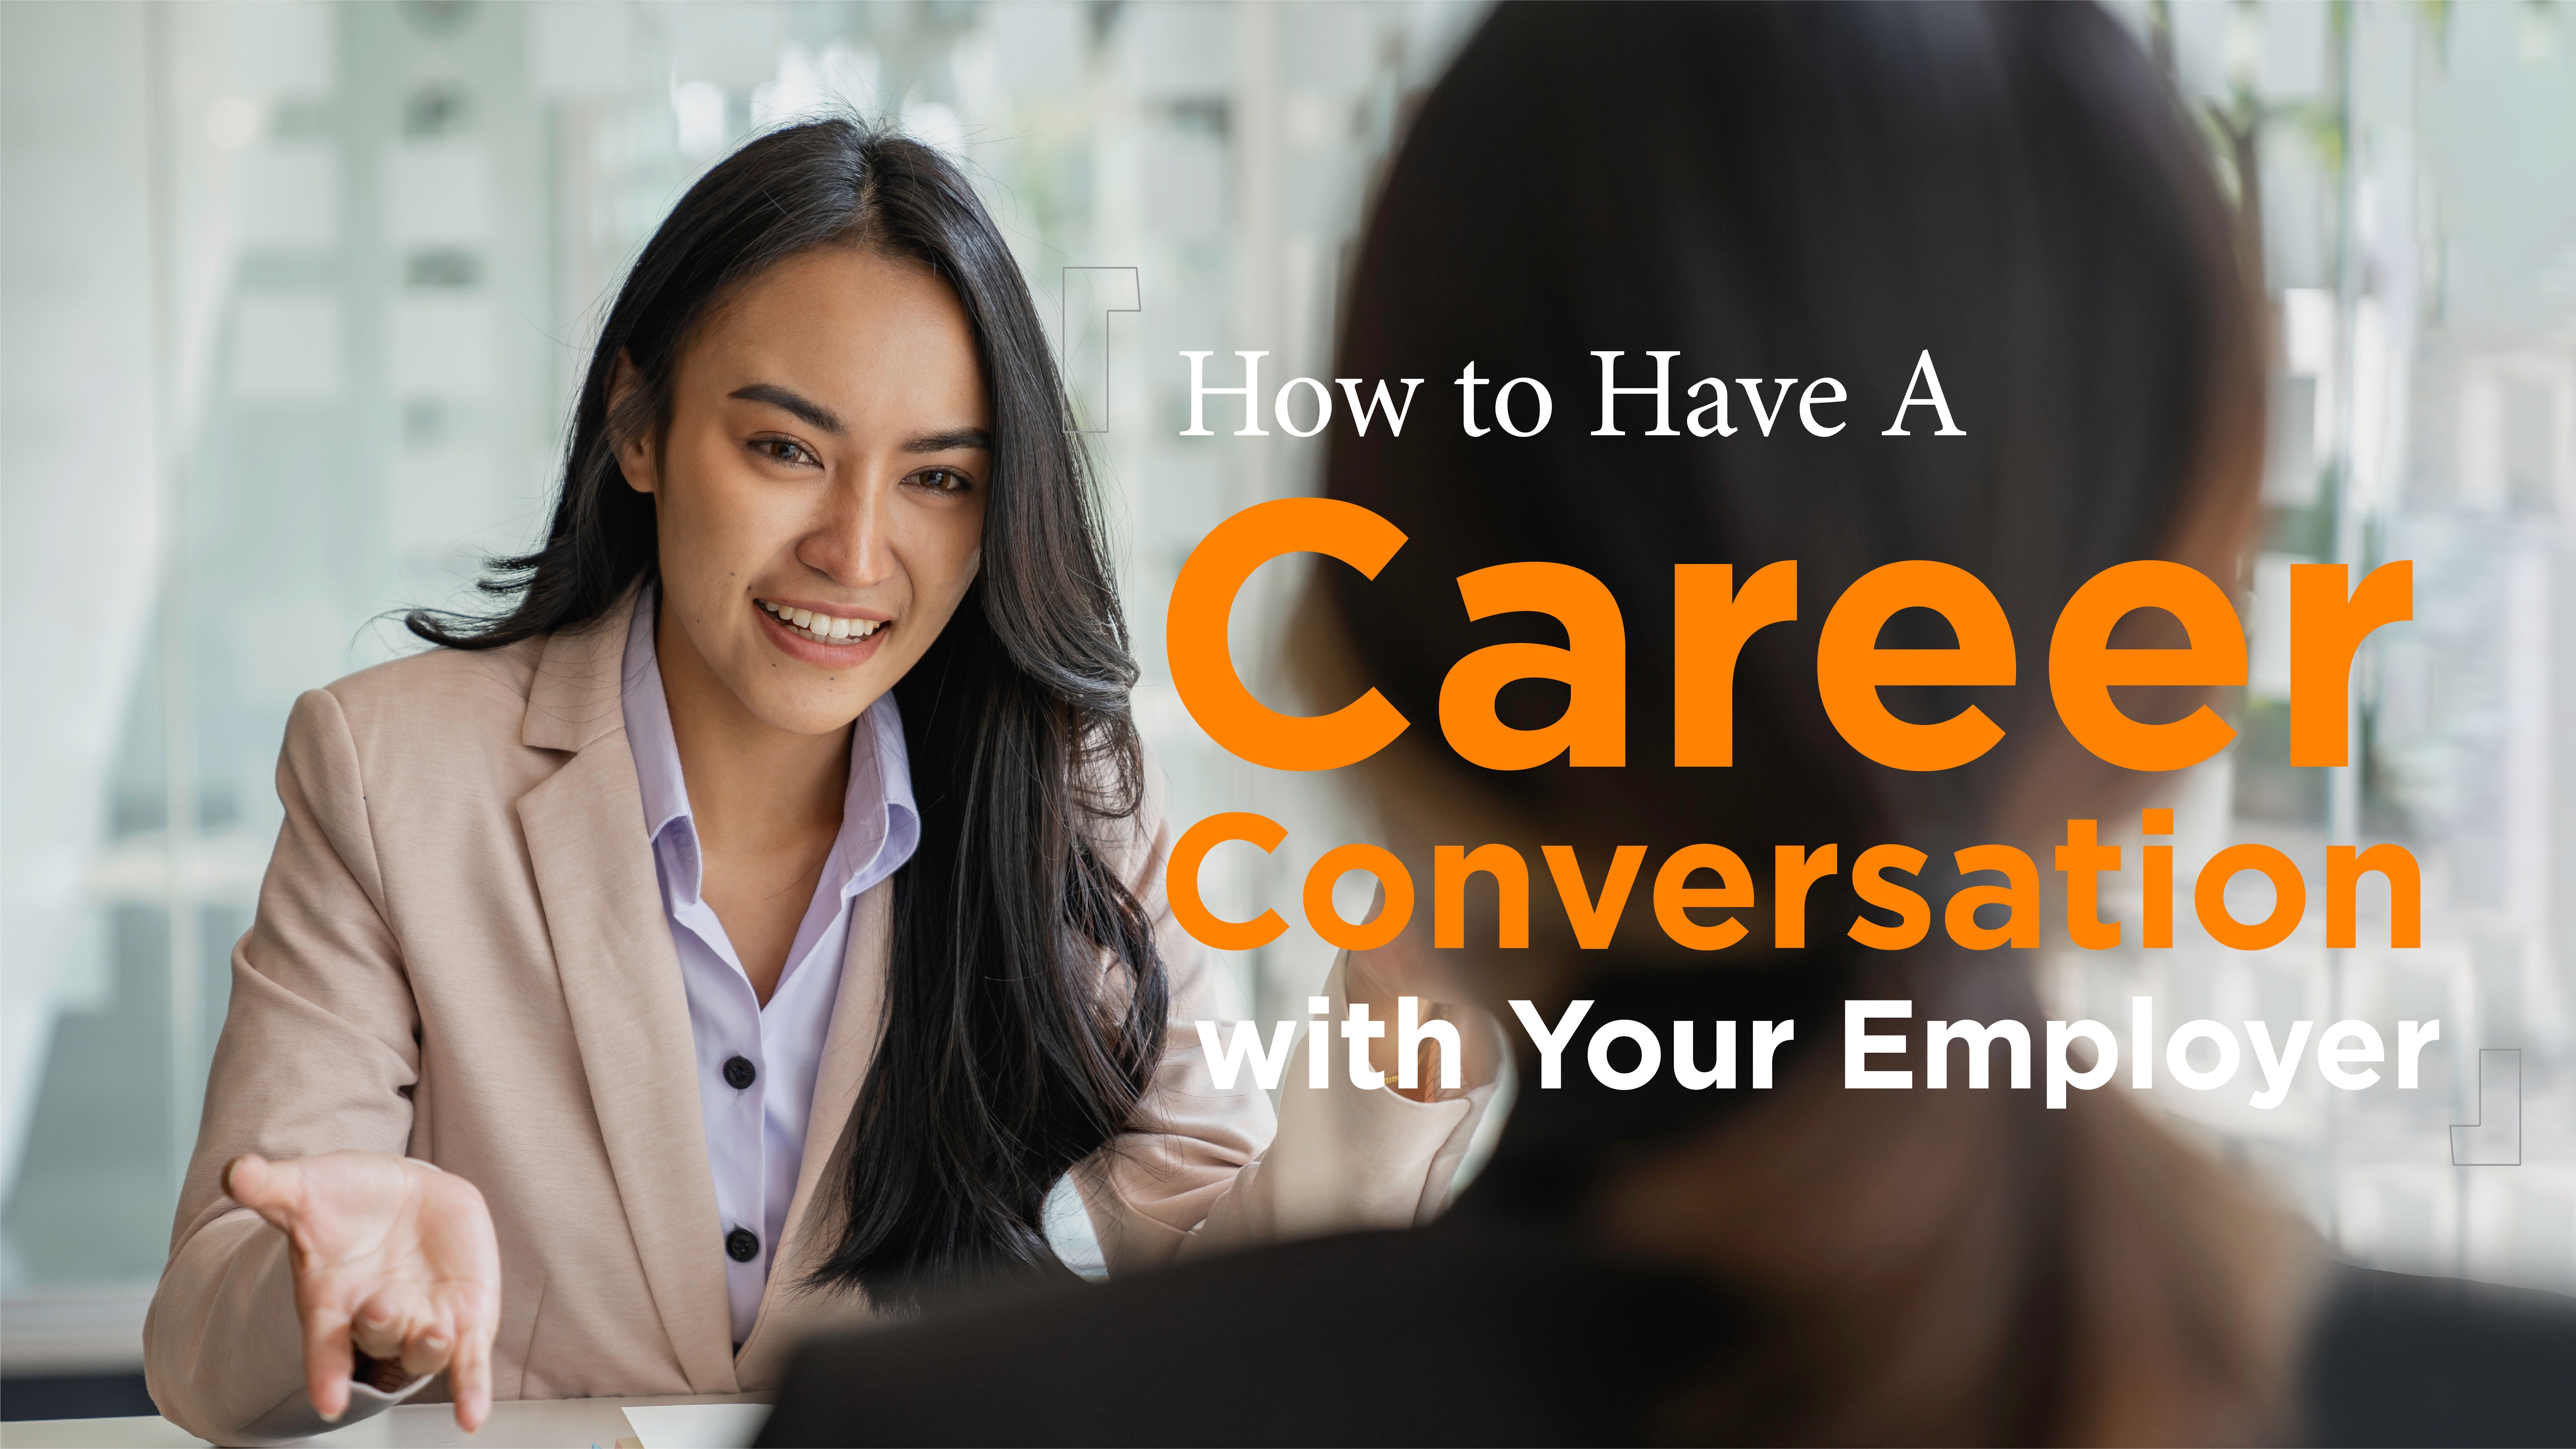 How To Have A Career Conversation With Your Employer